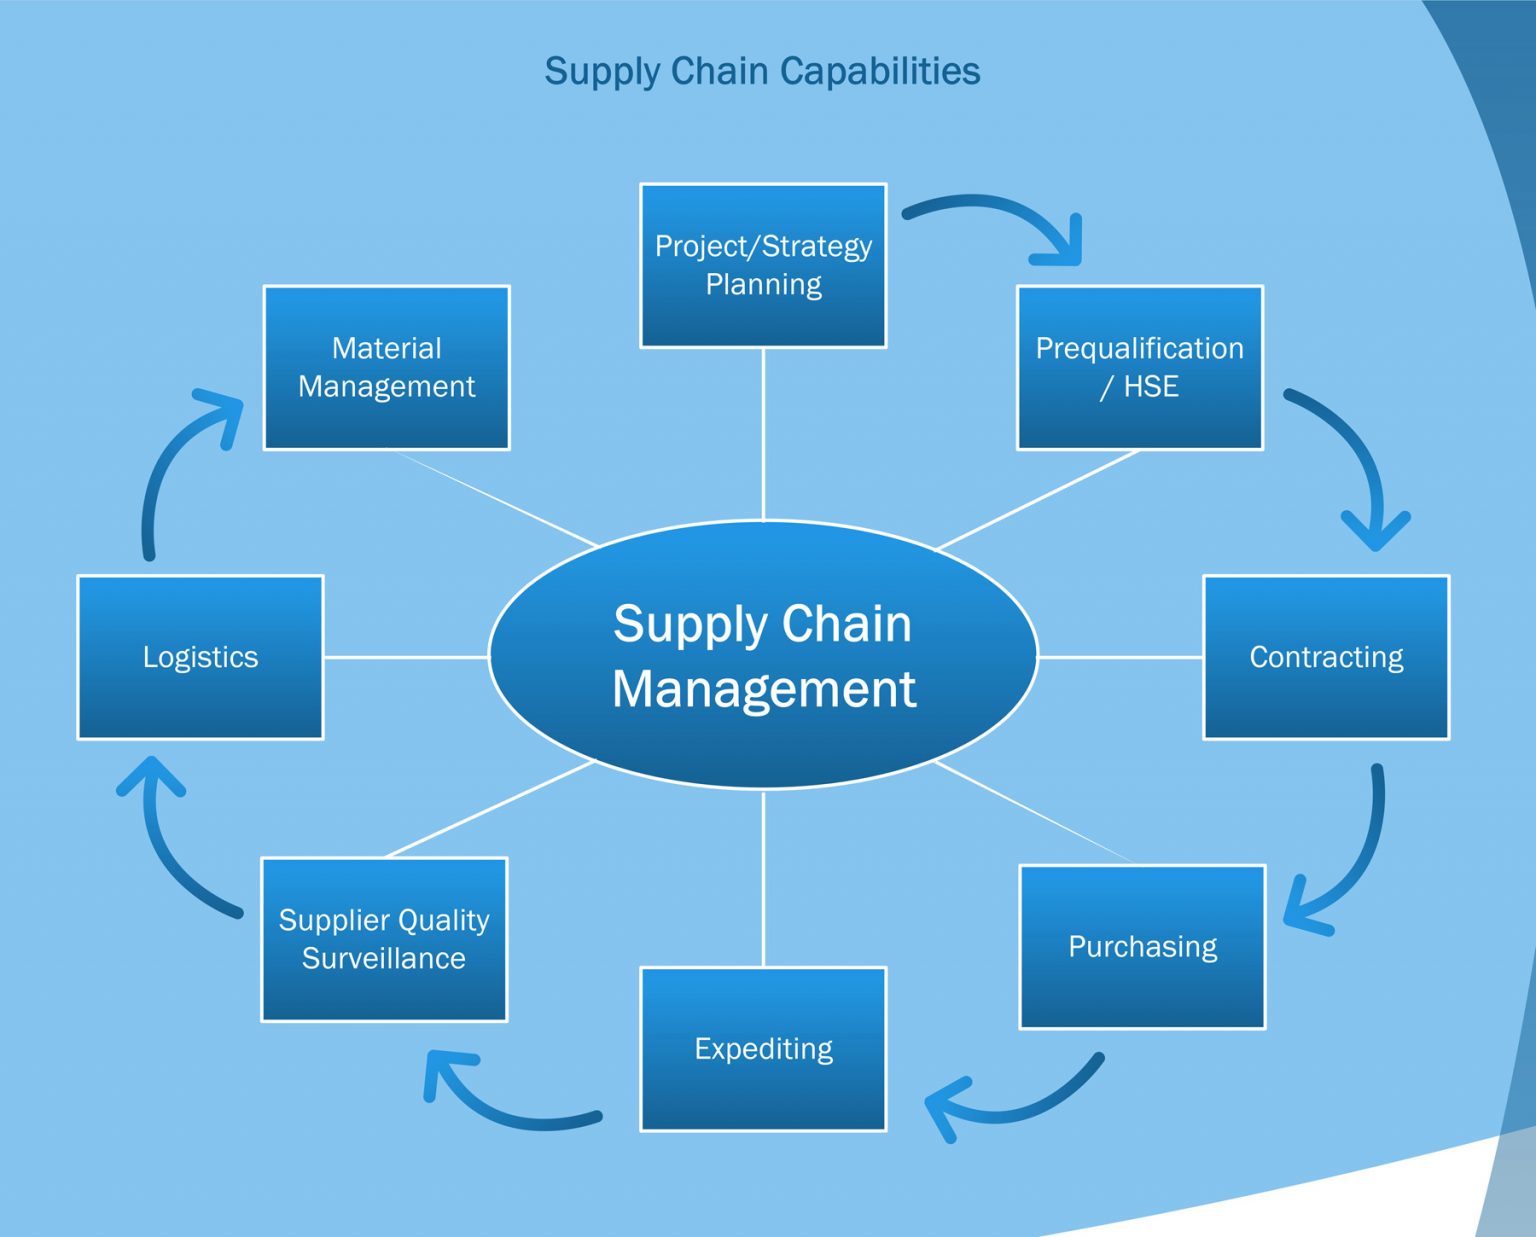 study on supply chain management practices